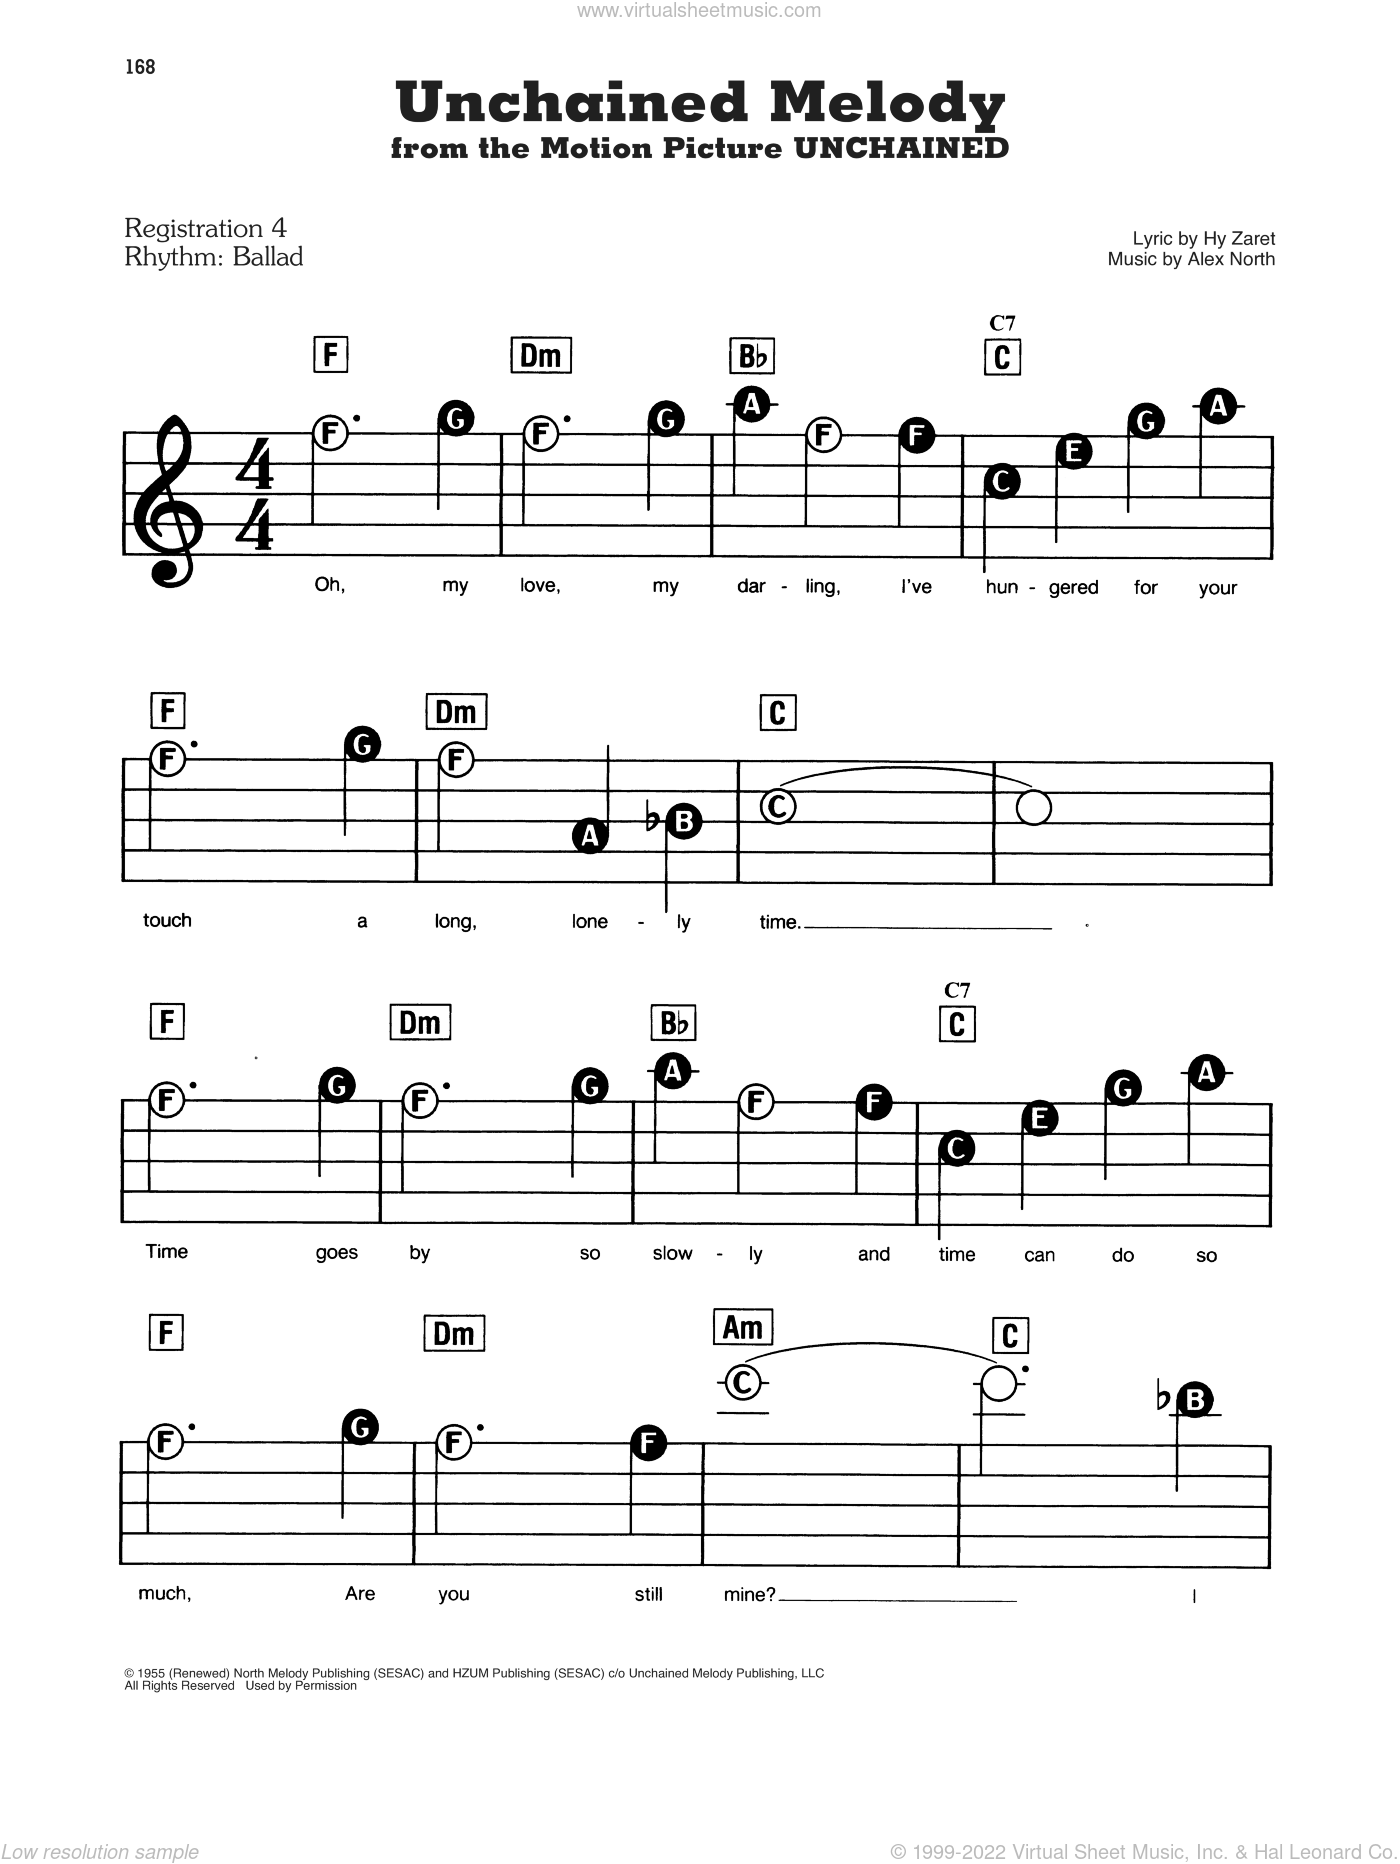 Brothers - Unchained Melody sheet music for piano or ...